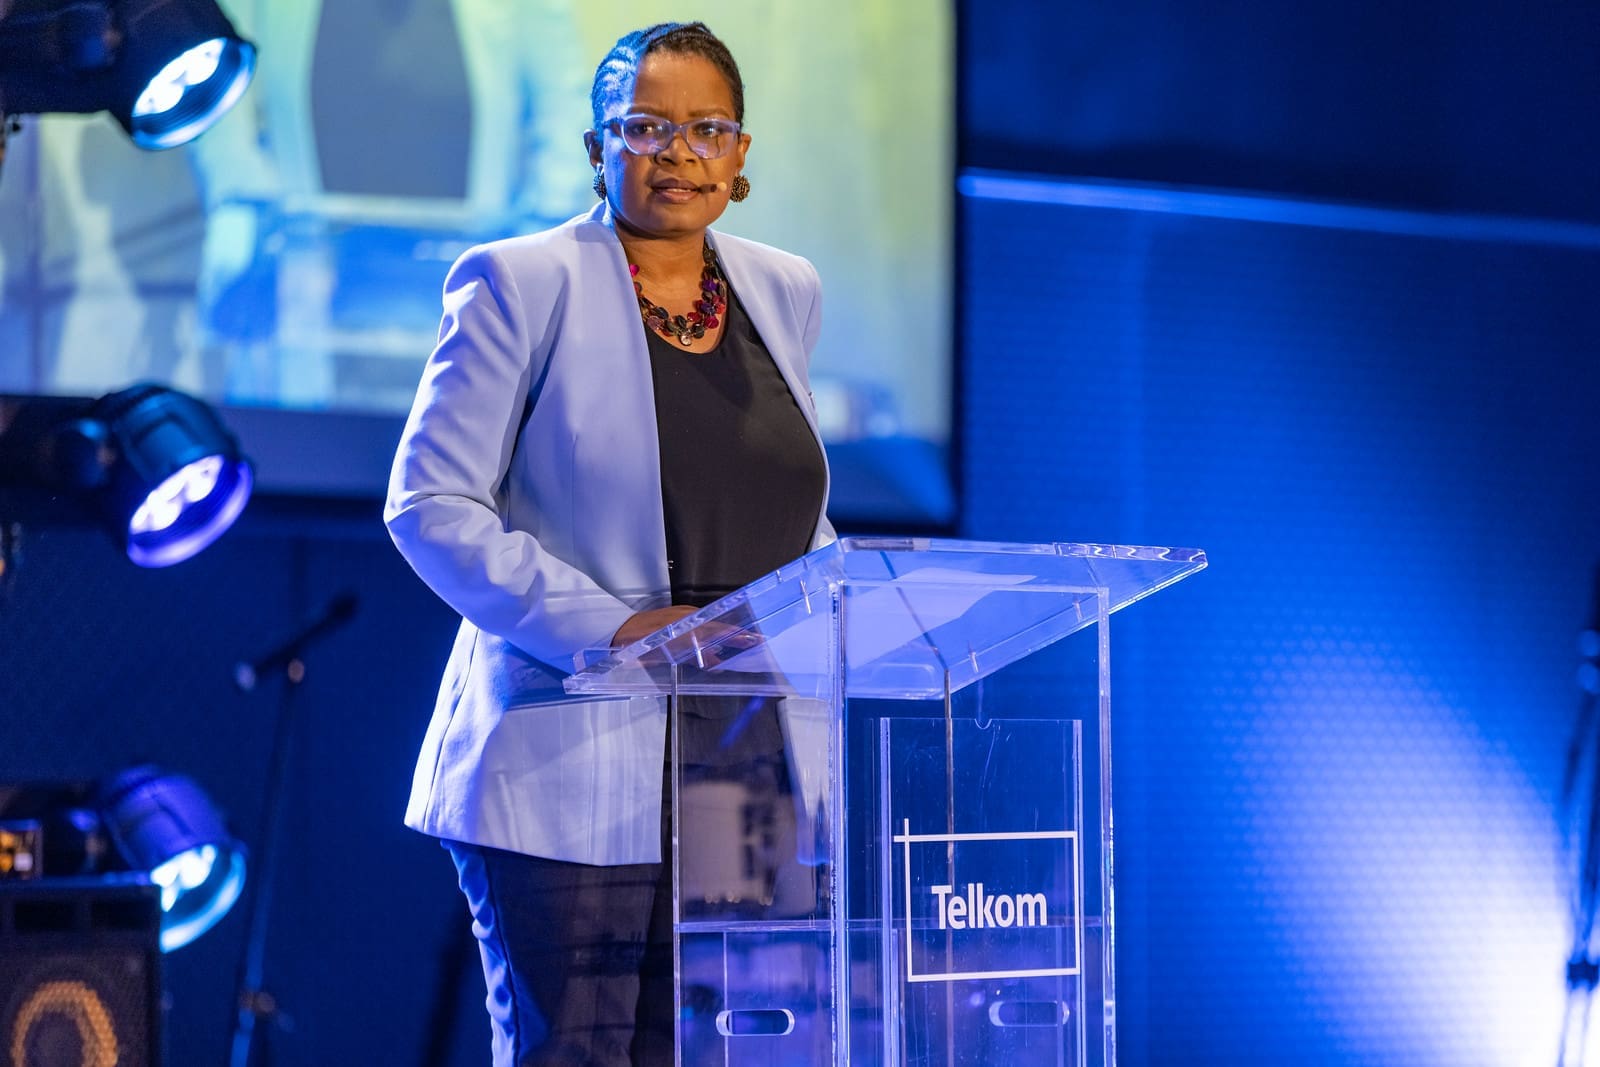 Dr Mmaki Jantjies, Telkom’s Group Executive for the Innovation and Transformation Office